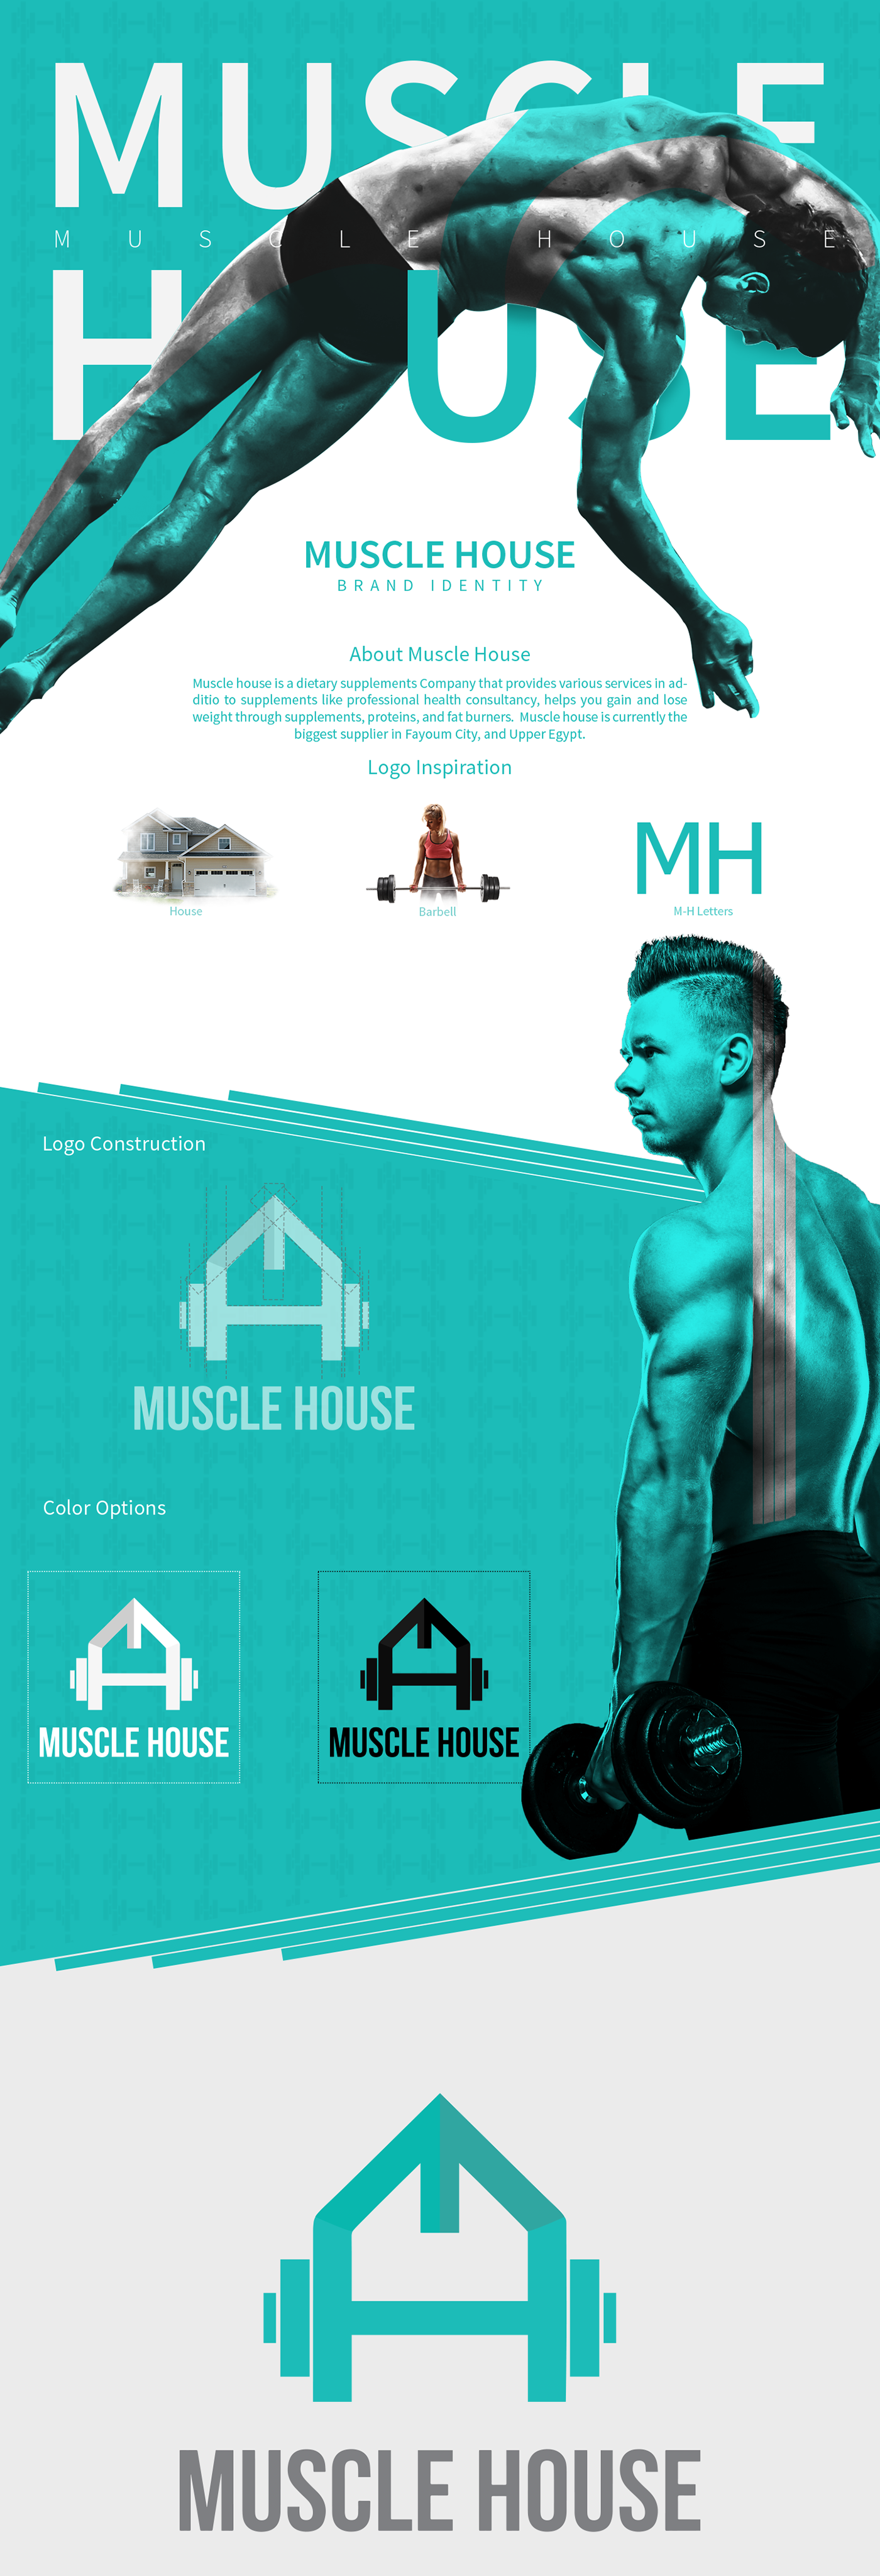 gym sport supplements BodyBuilding fitness lifestyle dietary diet muscle branding 